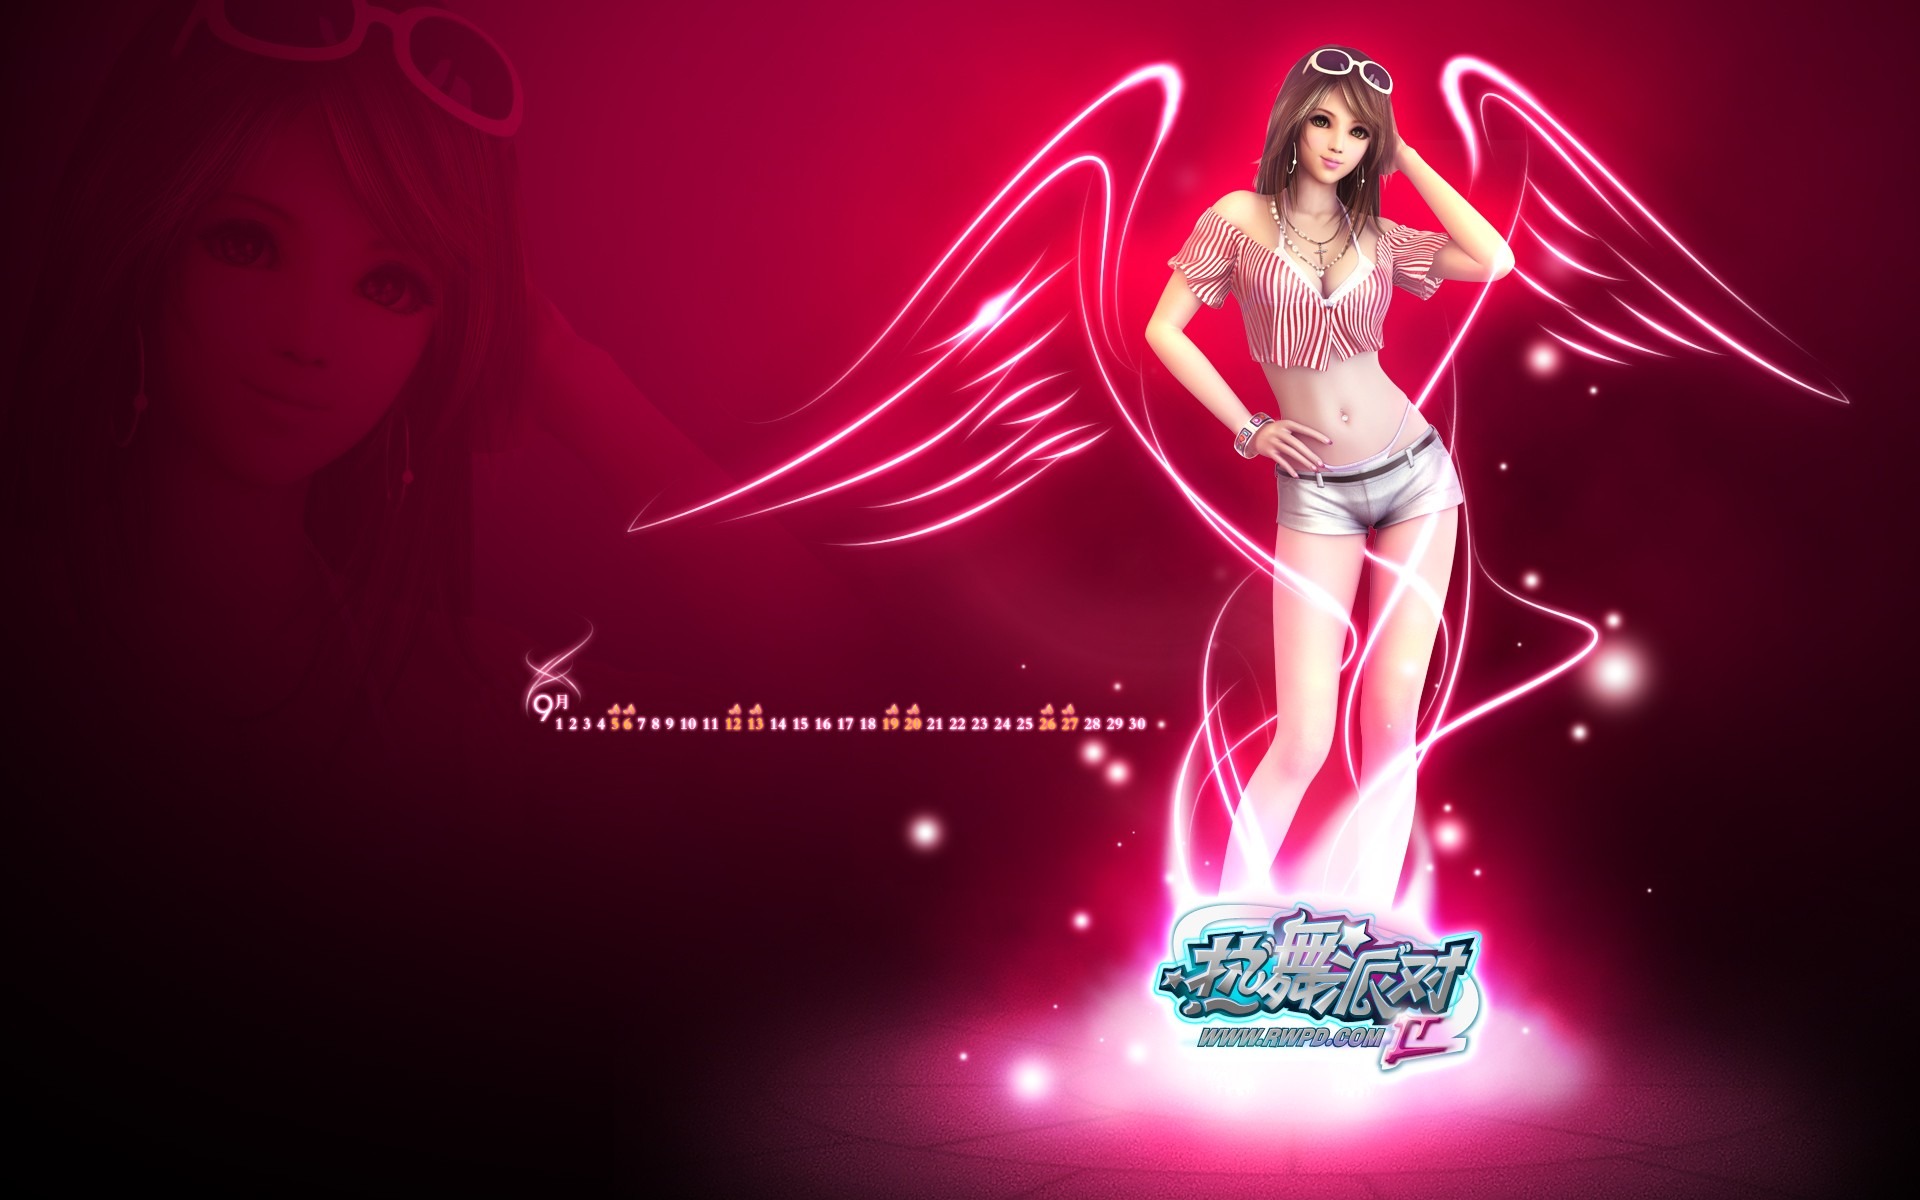 Online game Hot Dance Party II official wallpapers #2 - 1920x1200